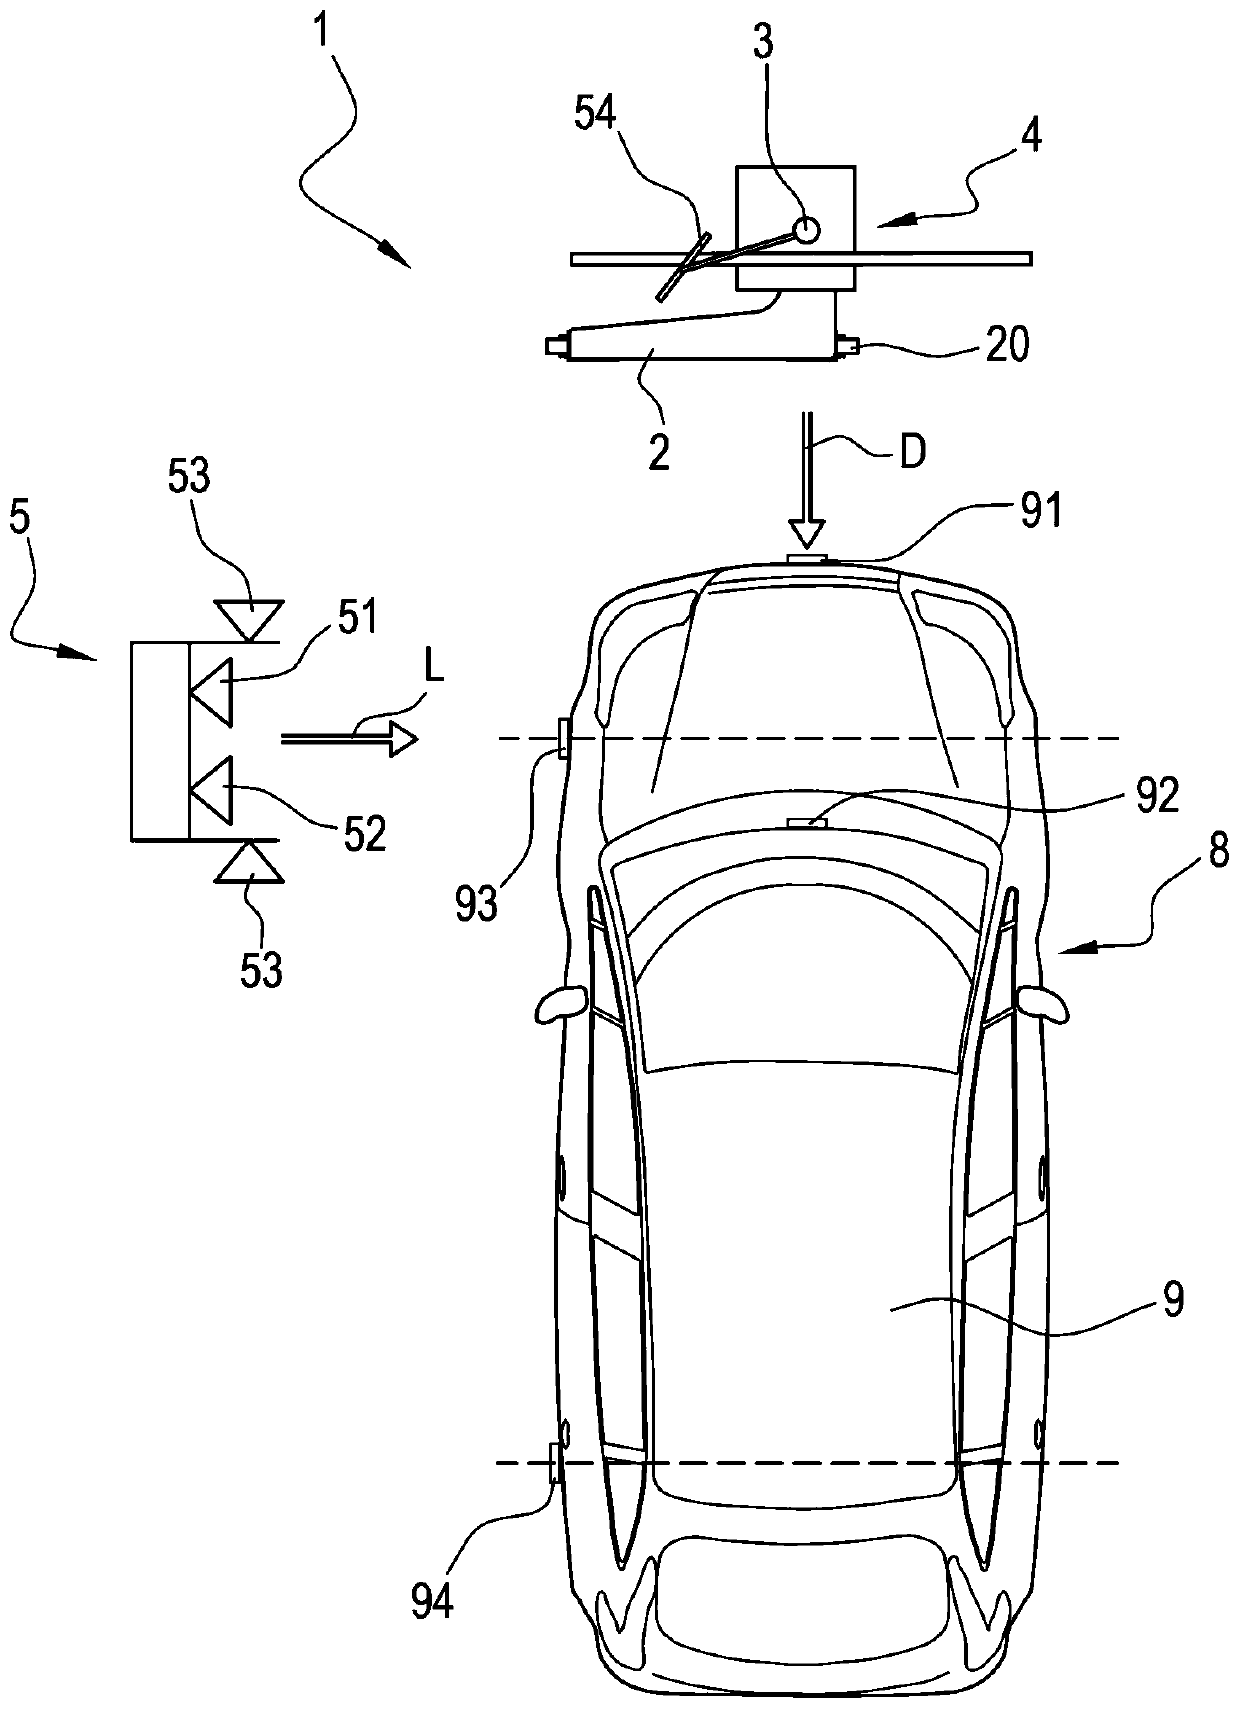 Apparatus for calibrating advanced driver assistance system sensor of vehicle